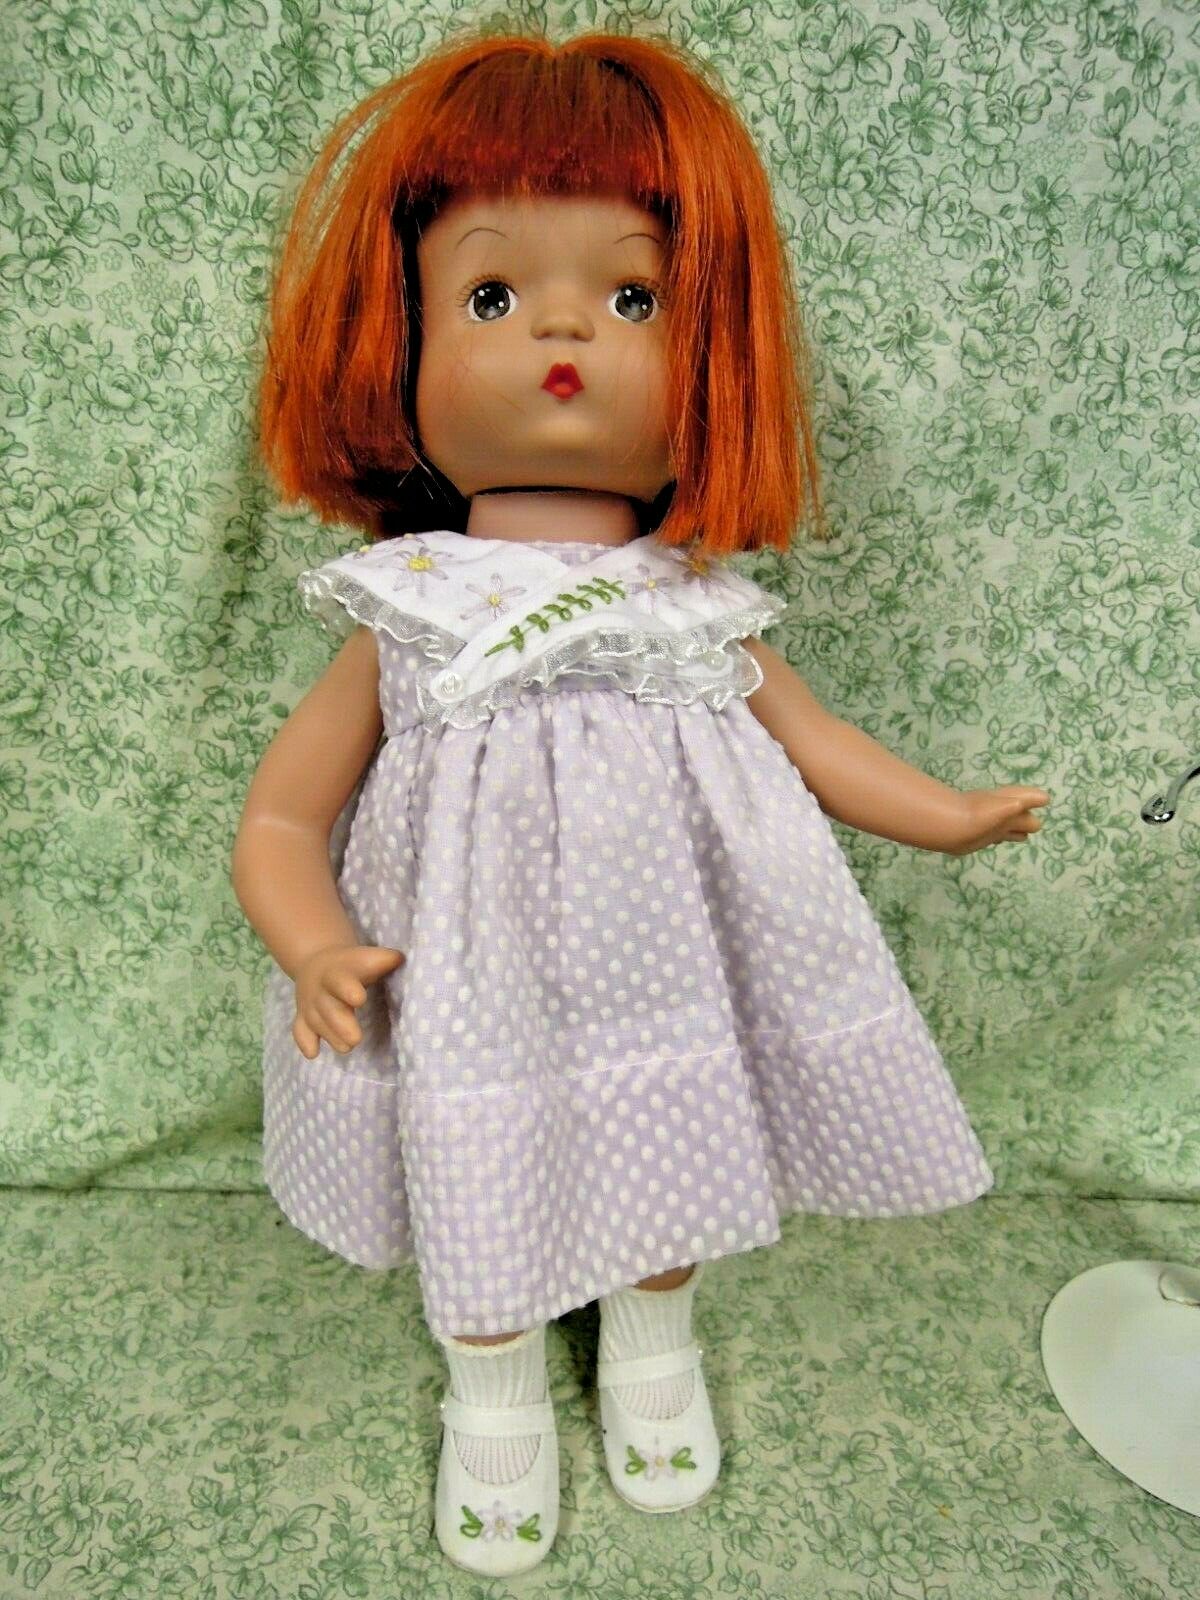 Lc-1329  Effanbee "patsy" Vinyl Doll; Reproduction In Lavender; Red Hair; 2003